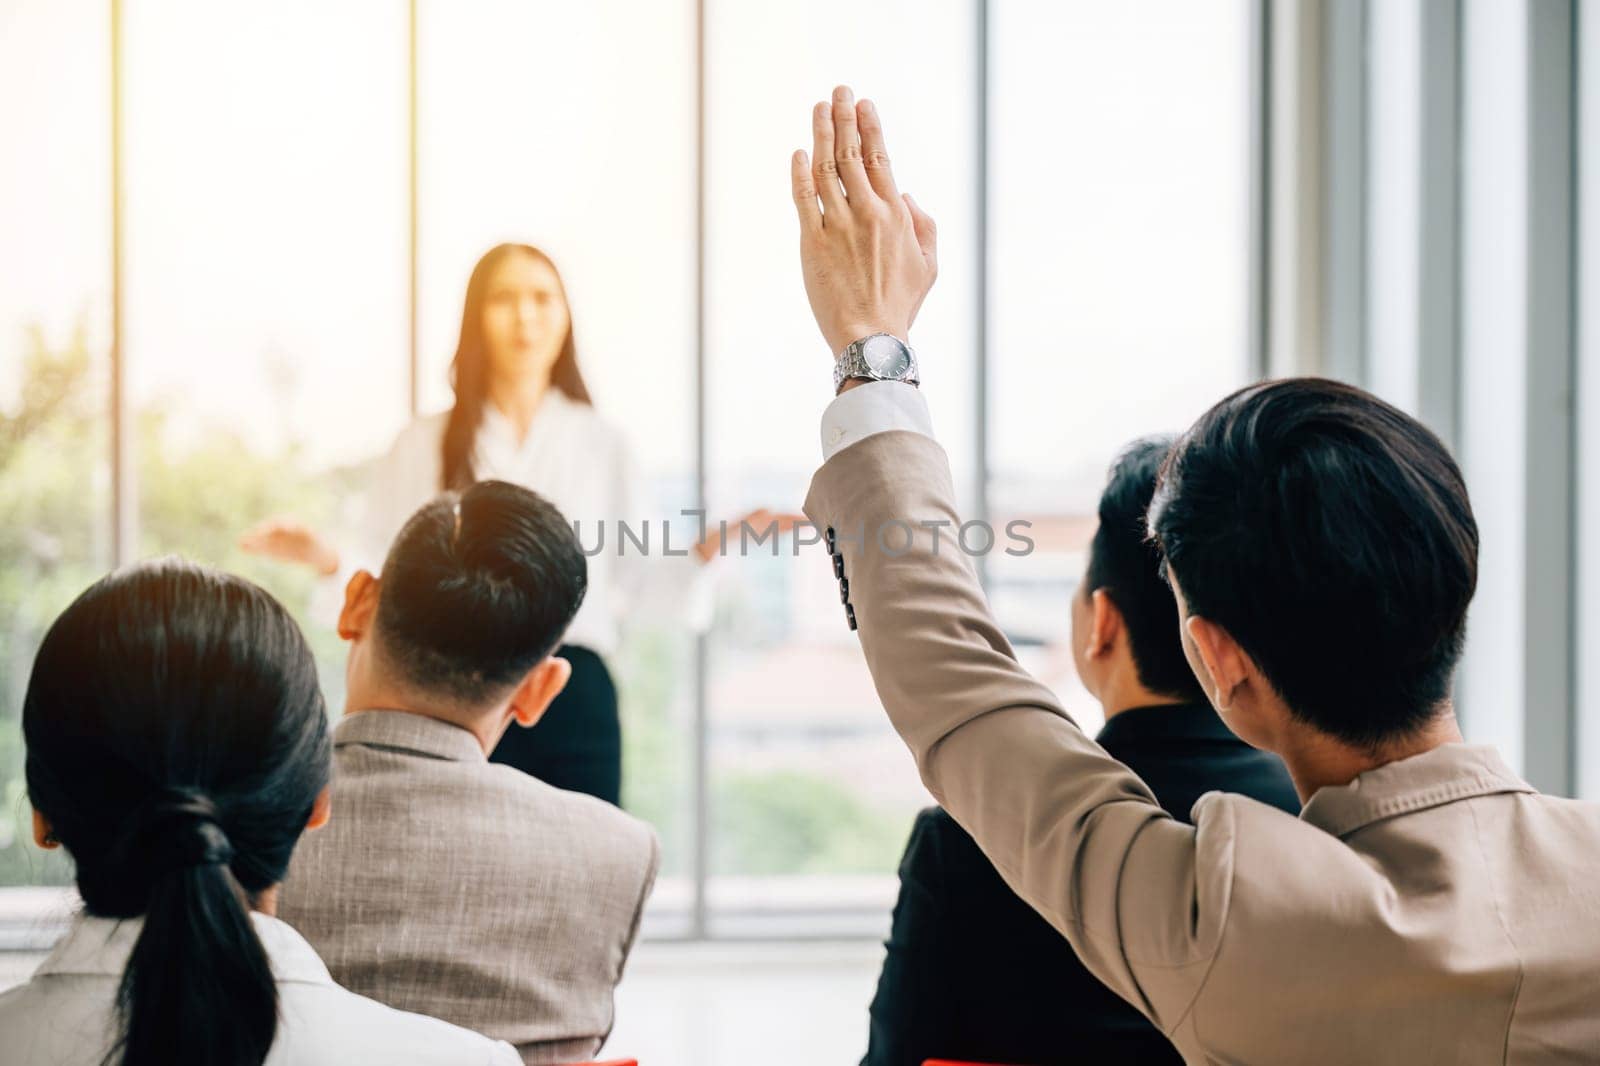 In a seminar classroom, a large group actively participates in the discussion, with raised hands indicating their engagement. The answers reside within this dynamic conference audience. by Sorapop